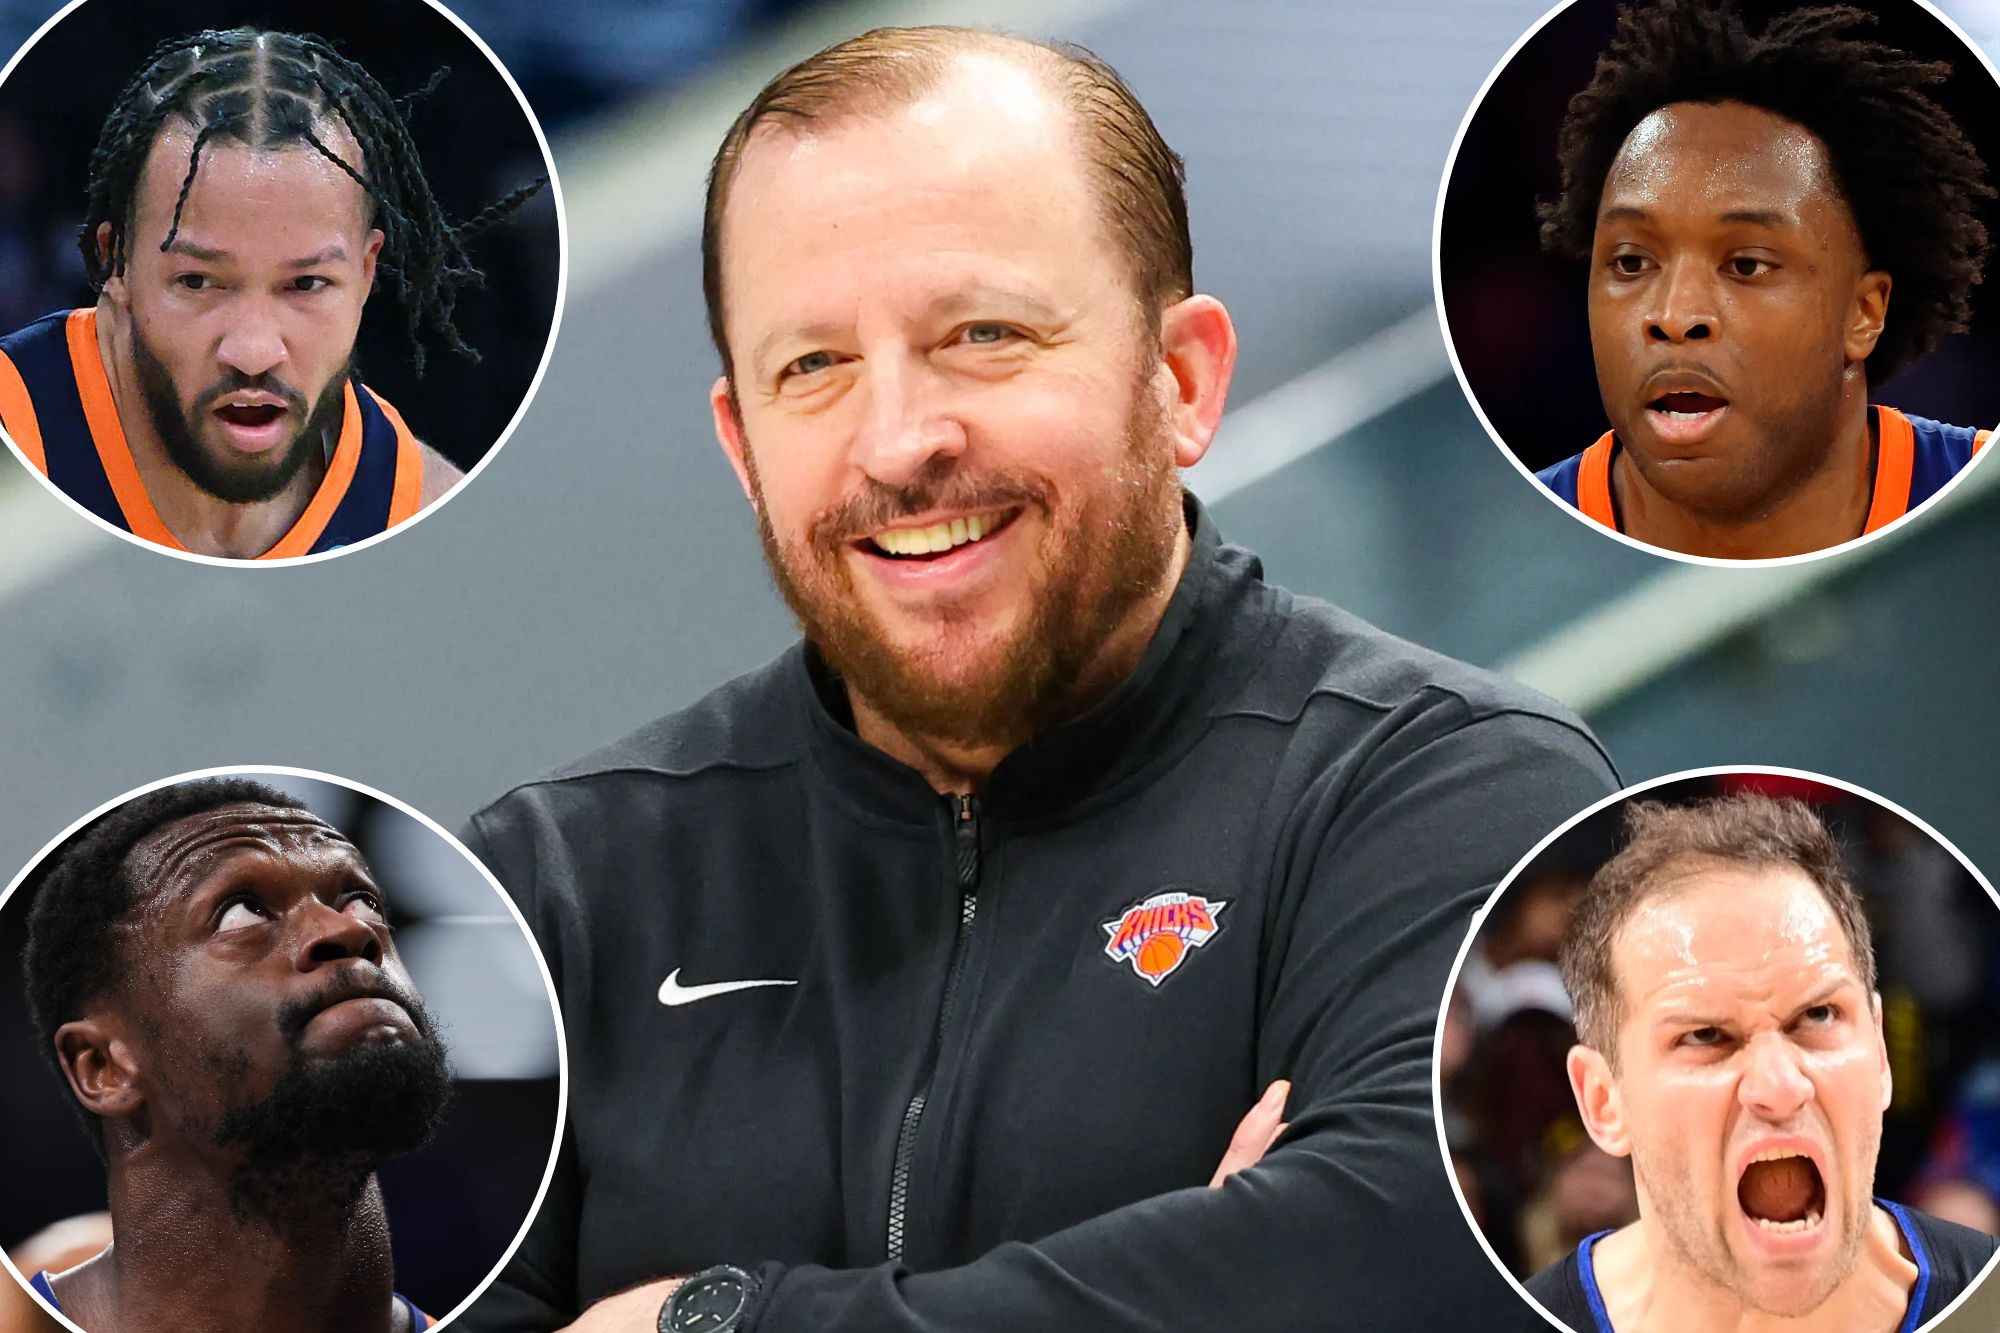 What will determine the Knicks’ fate this season?